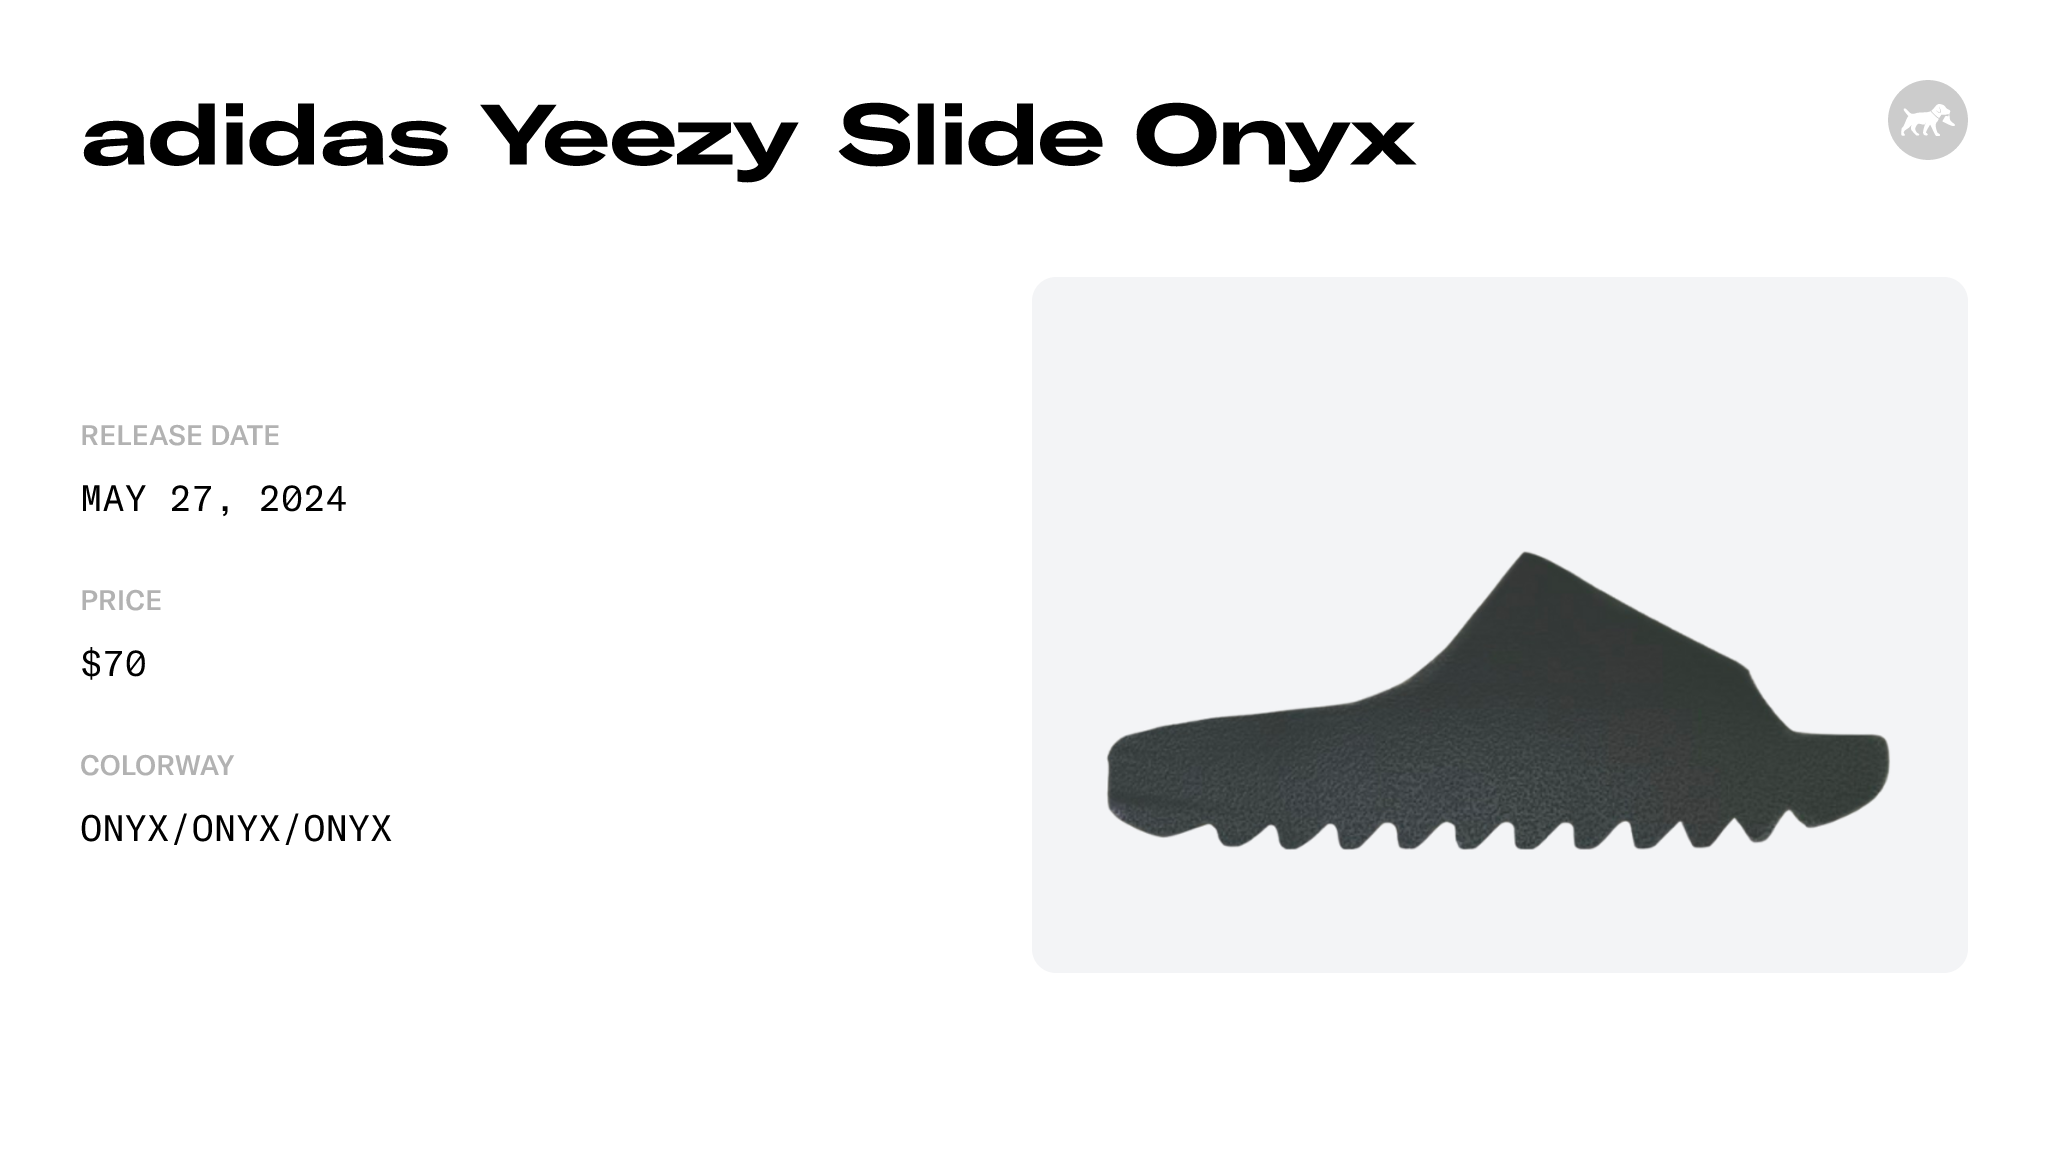 adidas Yeezy Slide Onyx HQ6448 Raffles and Release Date